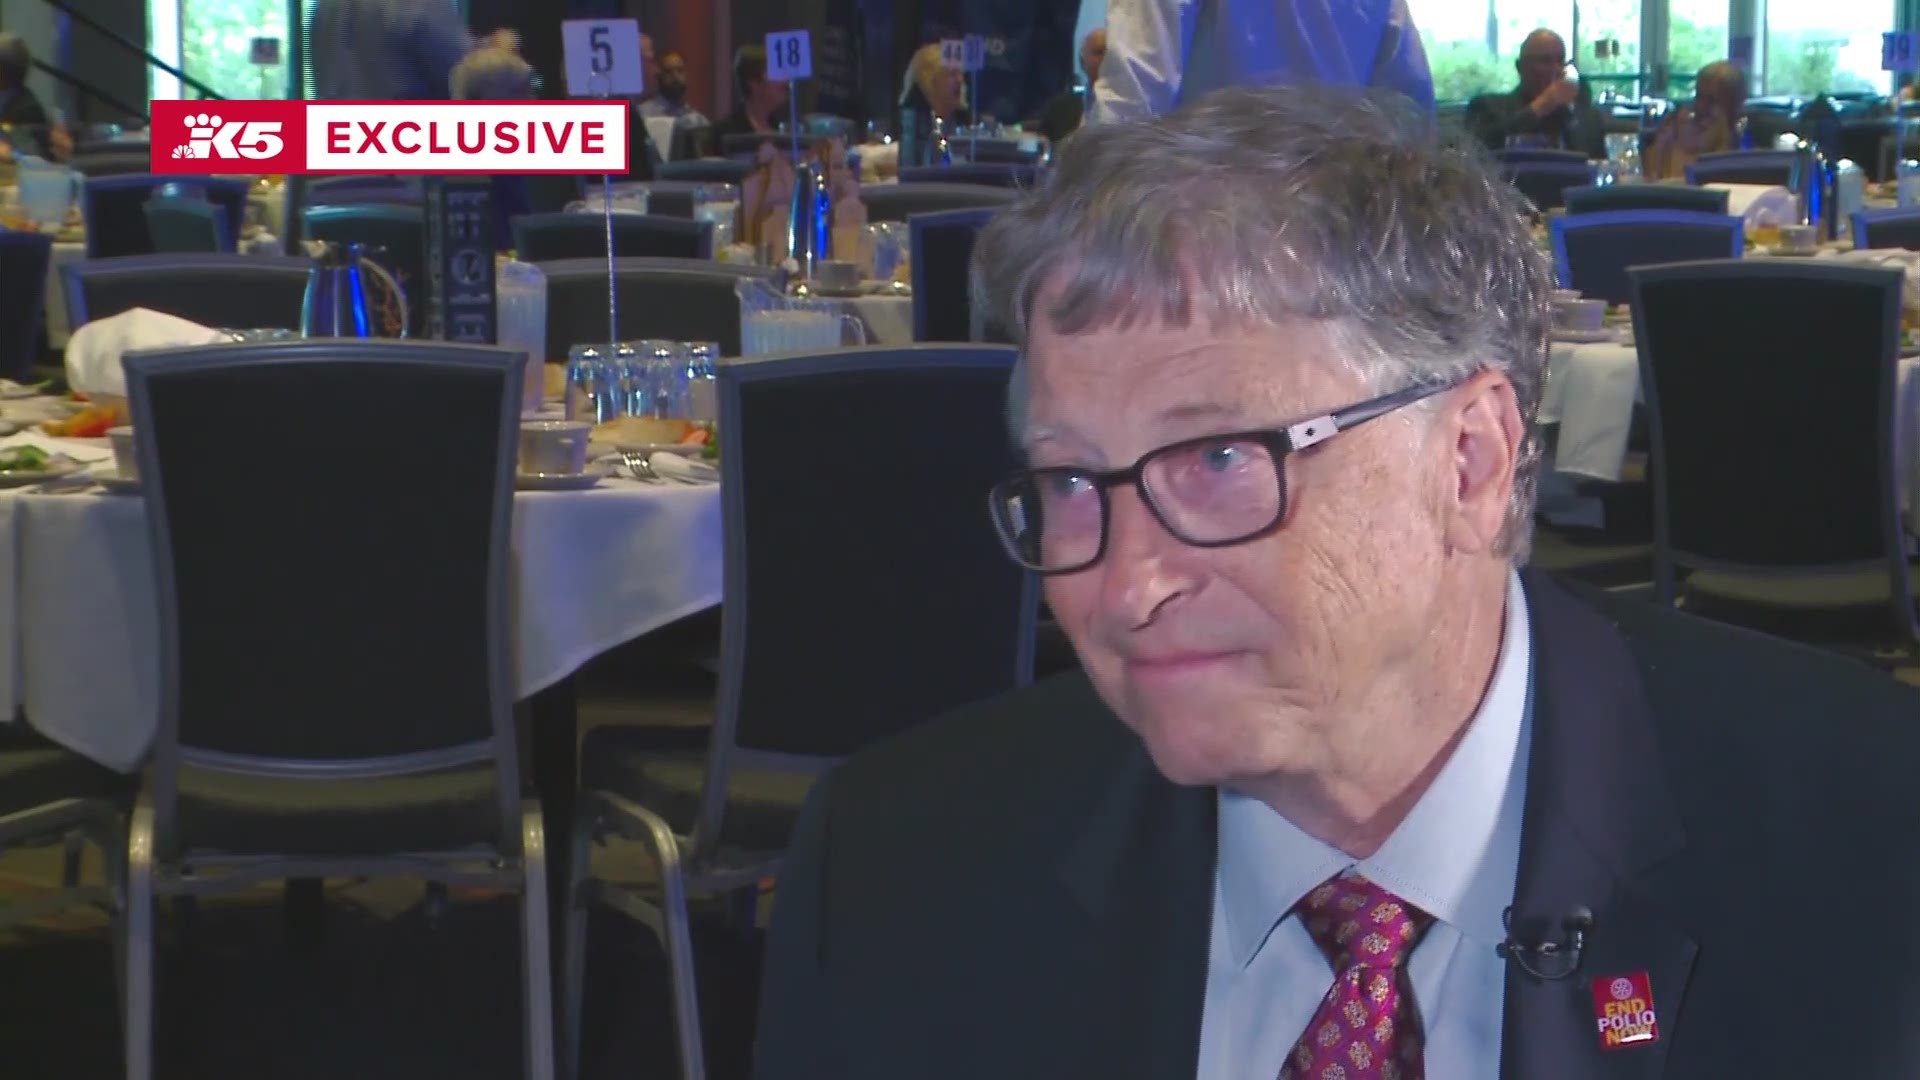 In an exclusive interview with KING 5, Bill Gates shared his thoughts on the balance of power in his marriage after his wife Melinda published the book, ‘The Moment of Lift,’ that included stories of them sharing responsibility.